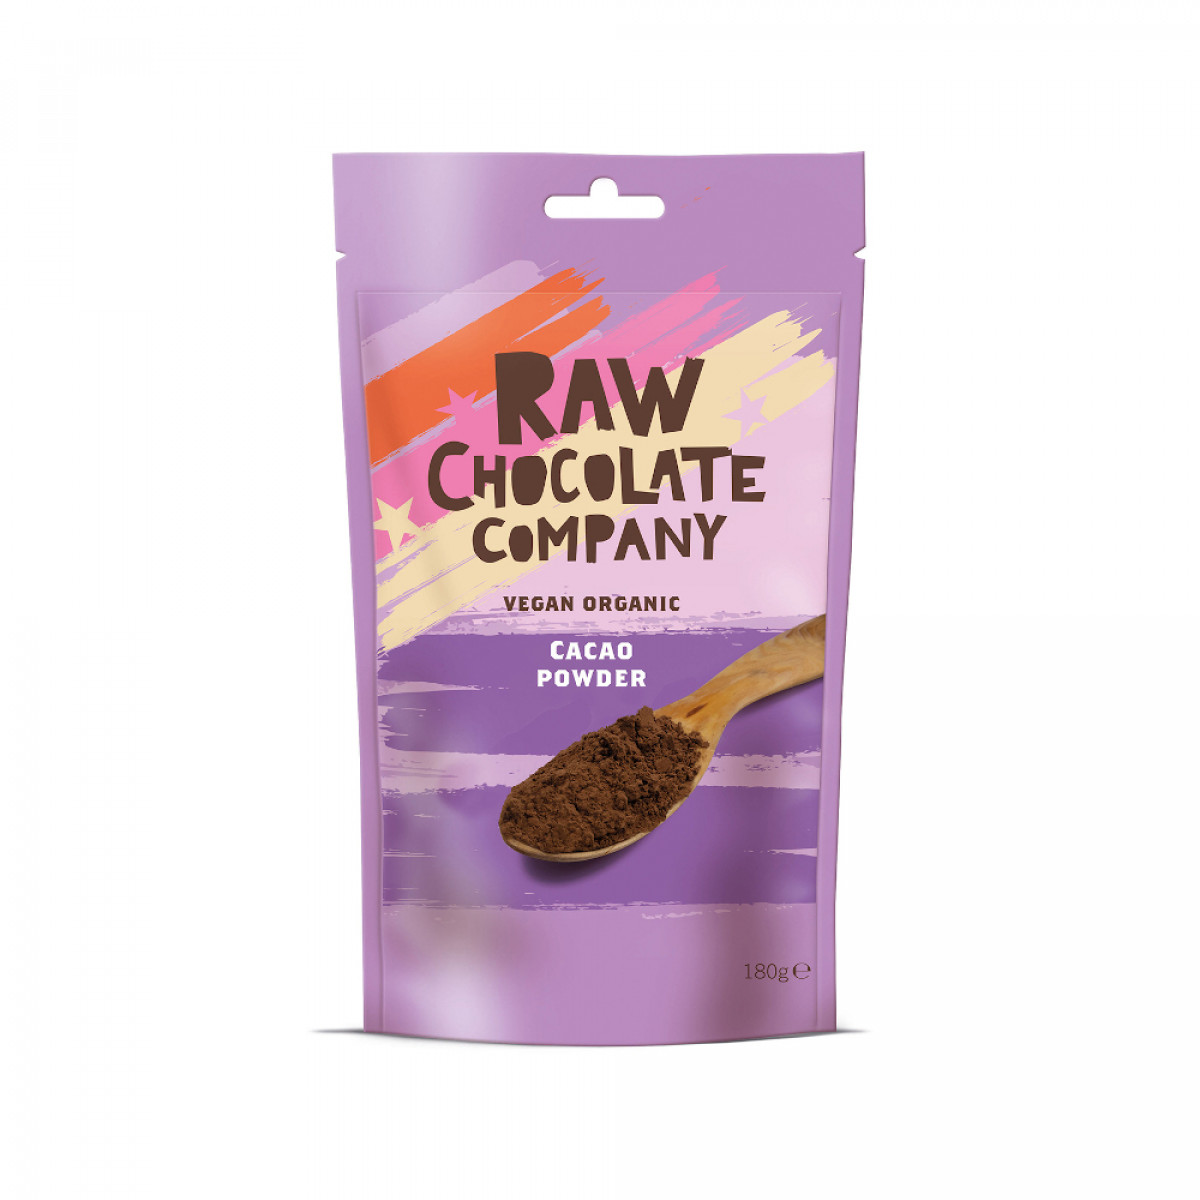 Product picture for Raw Cacao Powder